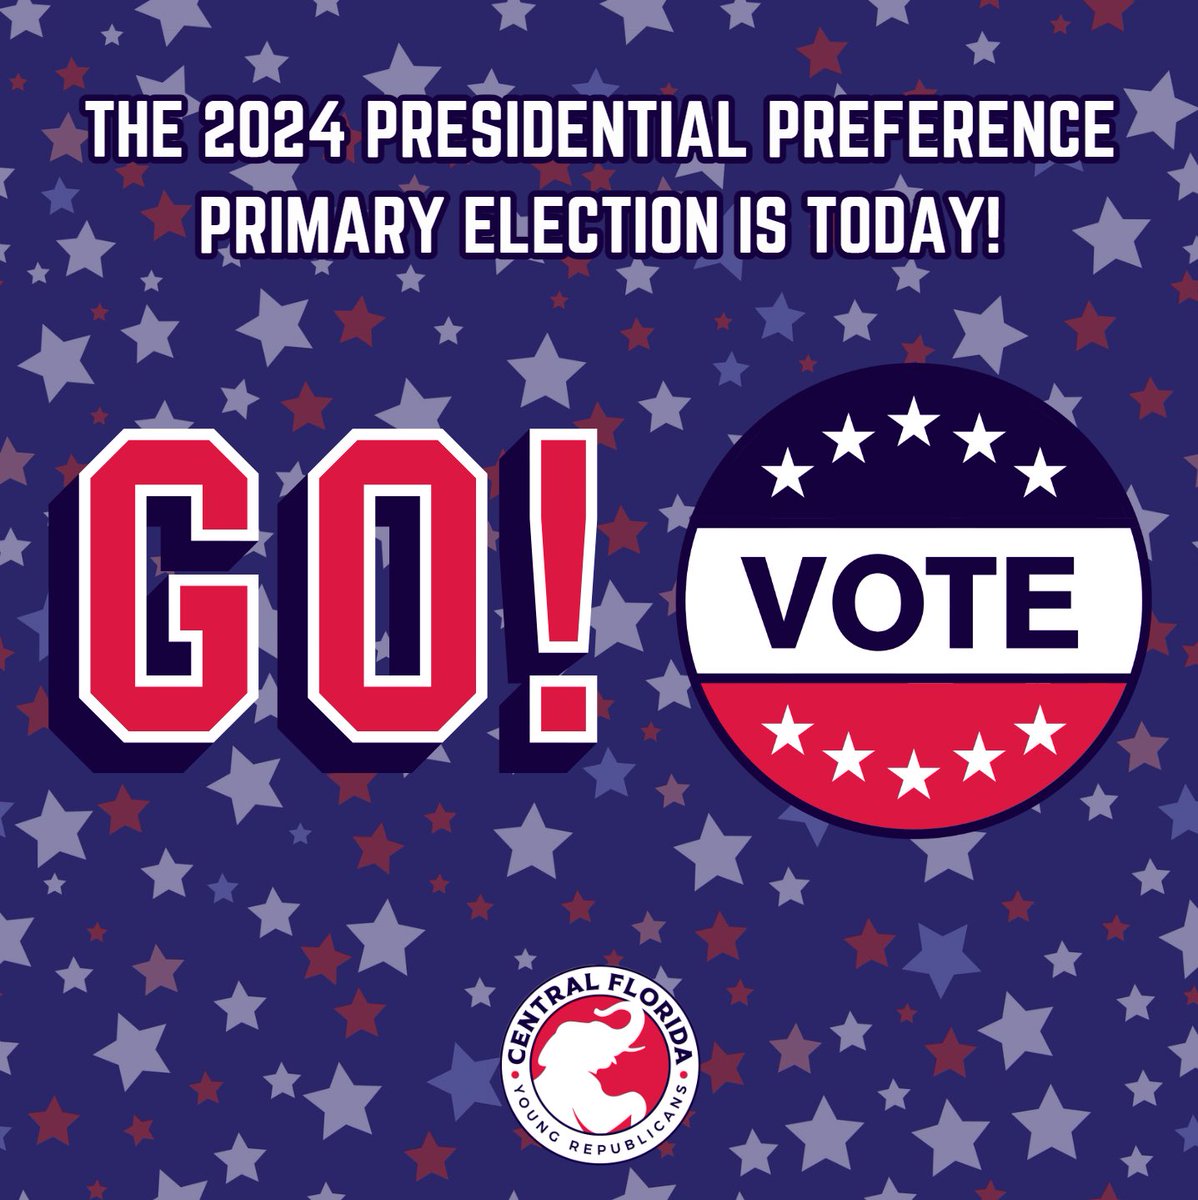 Today is the 2024 Presidential Preference Primary Election! 🗳️ 🇺🇸

From 7 a.m. to 7 p.m. your neighborhood-based polling location will be open to your community. So be sure to get out and vote today!

#CFLYR #FlaPol #YoungRepublicans